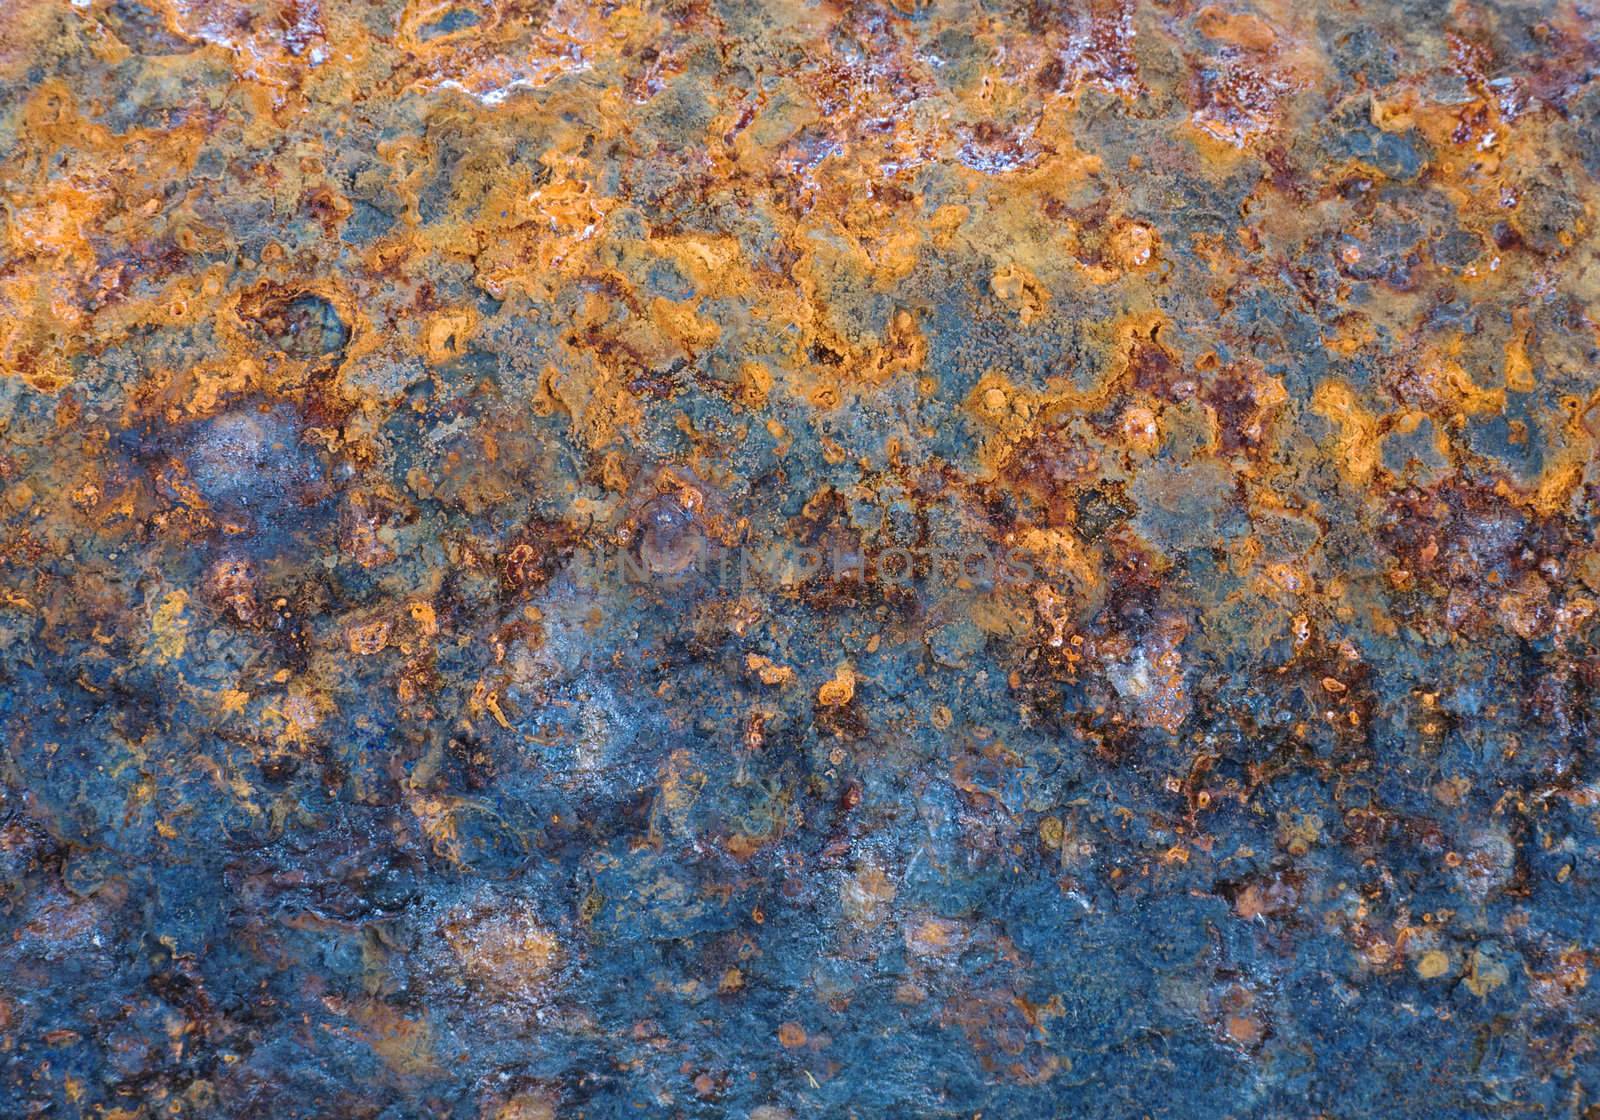 Grunge, old, rusty colored surface of metal